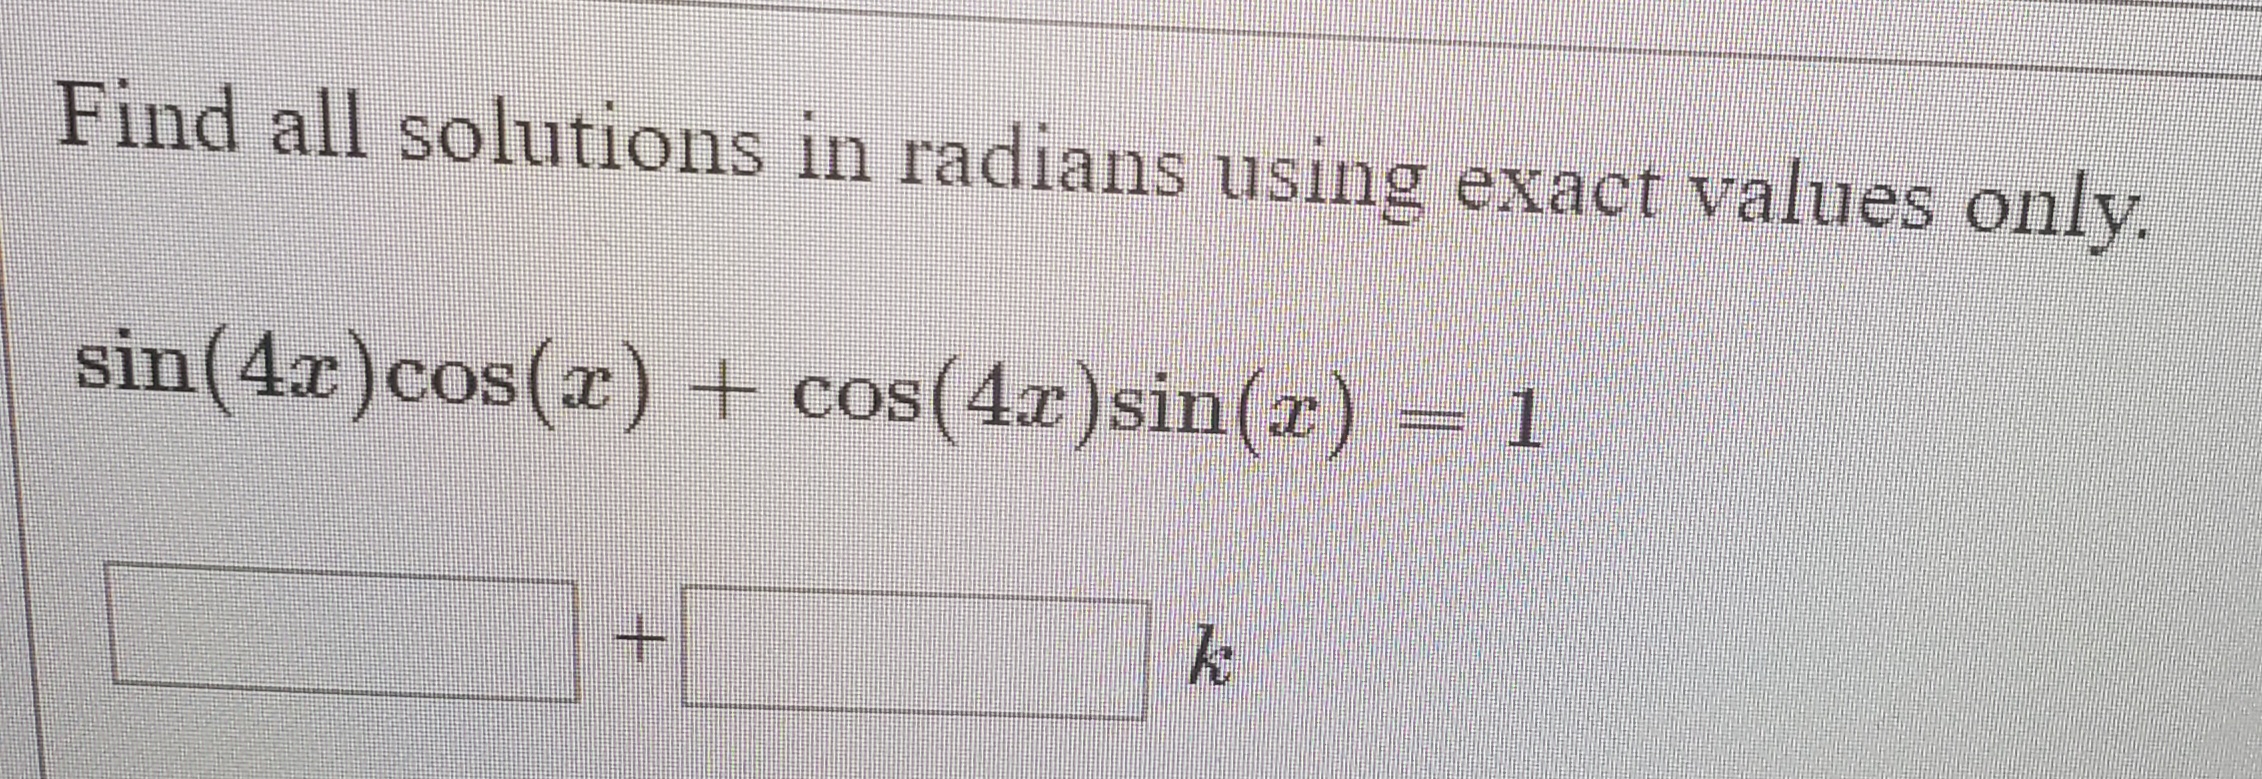 Find all solutions in radians using exact values only.
sin(4x)cos(x) + cos(4x)sin(z)= 1
CO
+.
